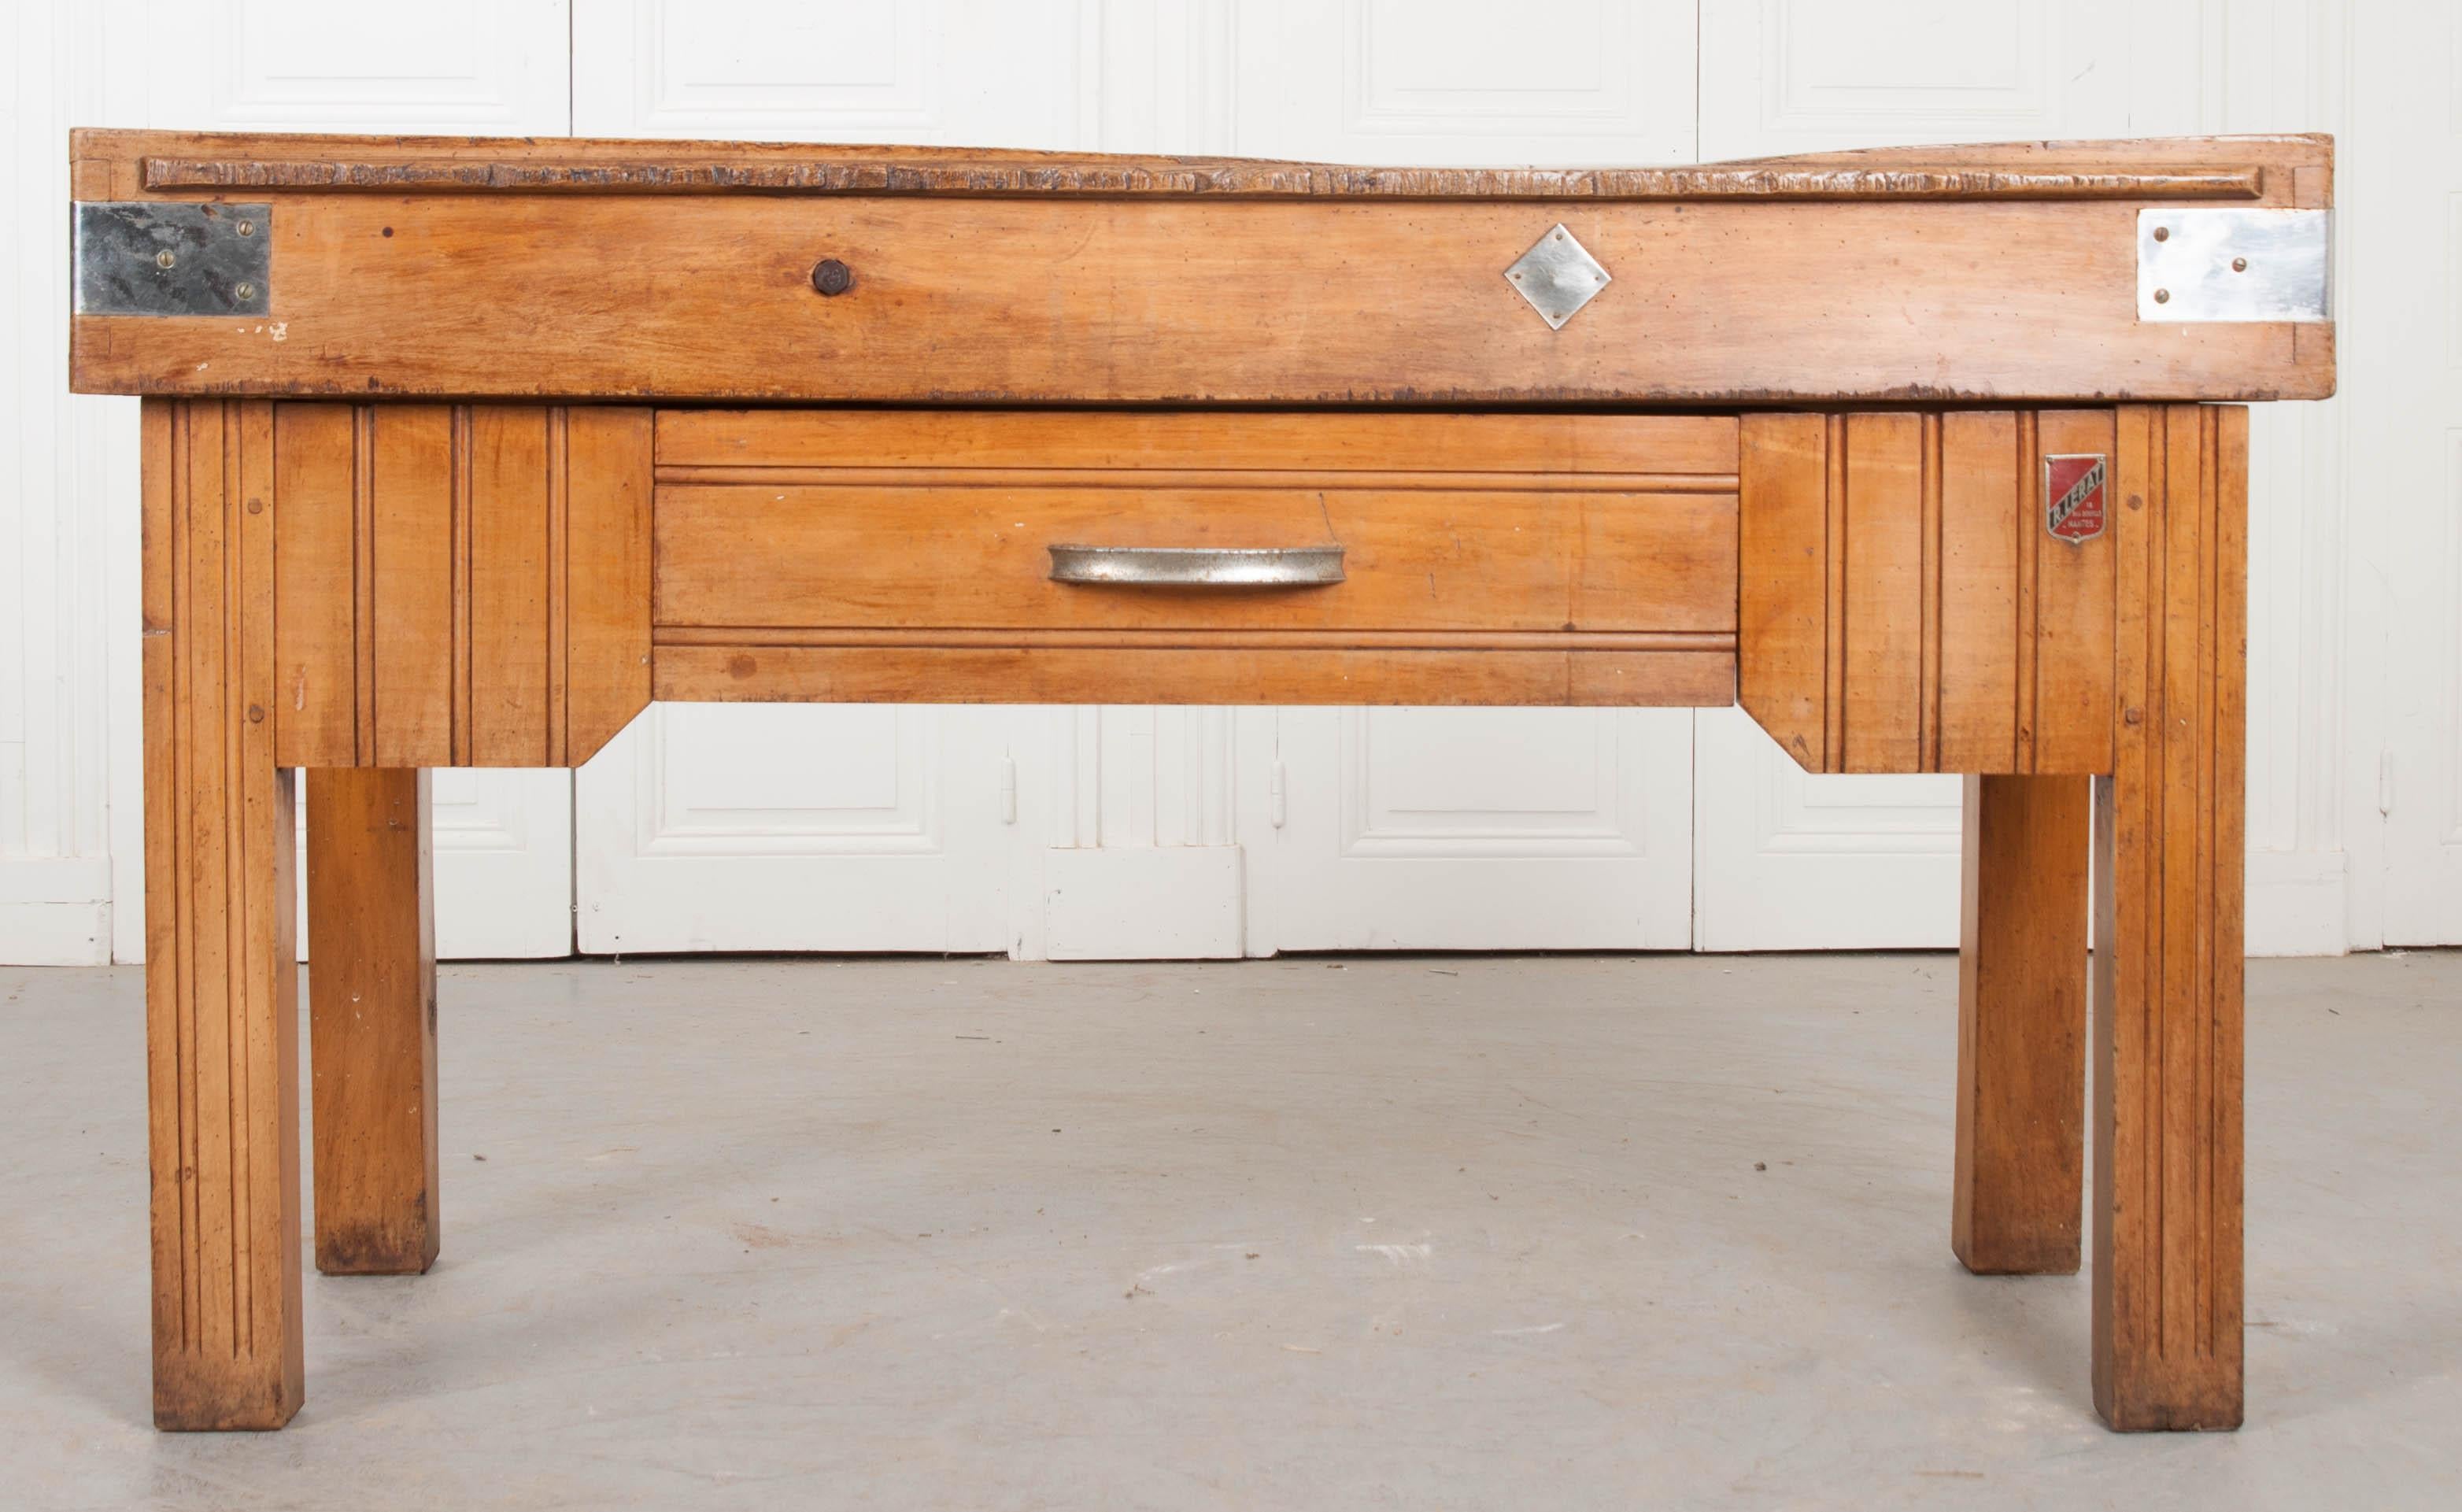 A fine butcher table, made in Nantes, France, circa 1920. The table’s top boasts exceptional patination. A groove has been left from decades of knife work and butchery. The top is bound together with steel bindings that help to keep the top from